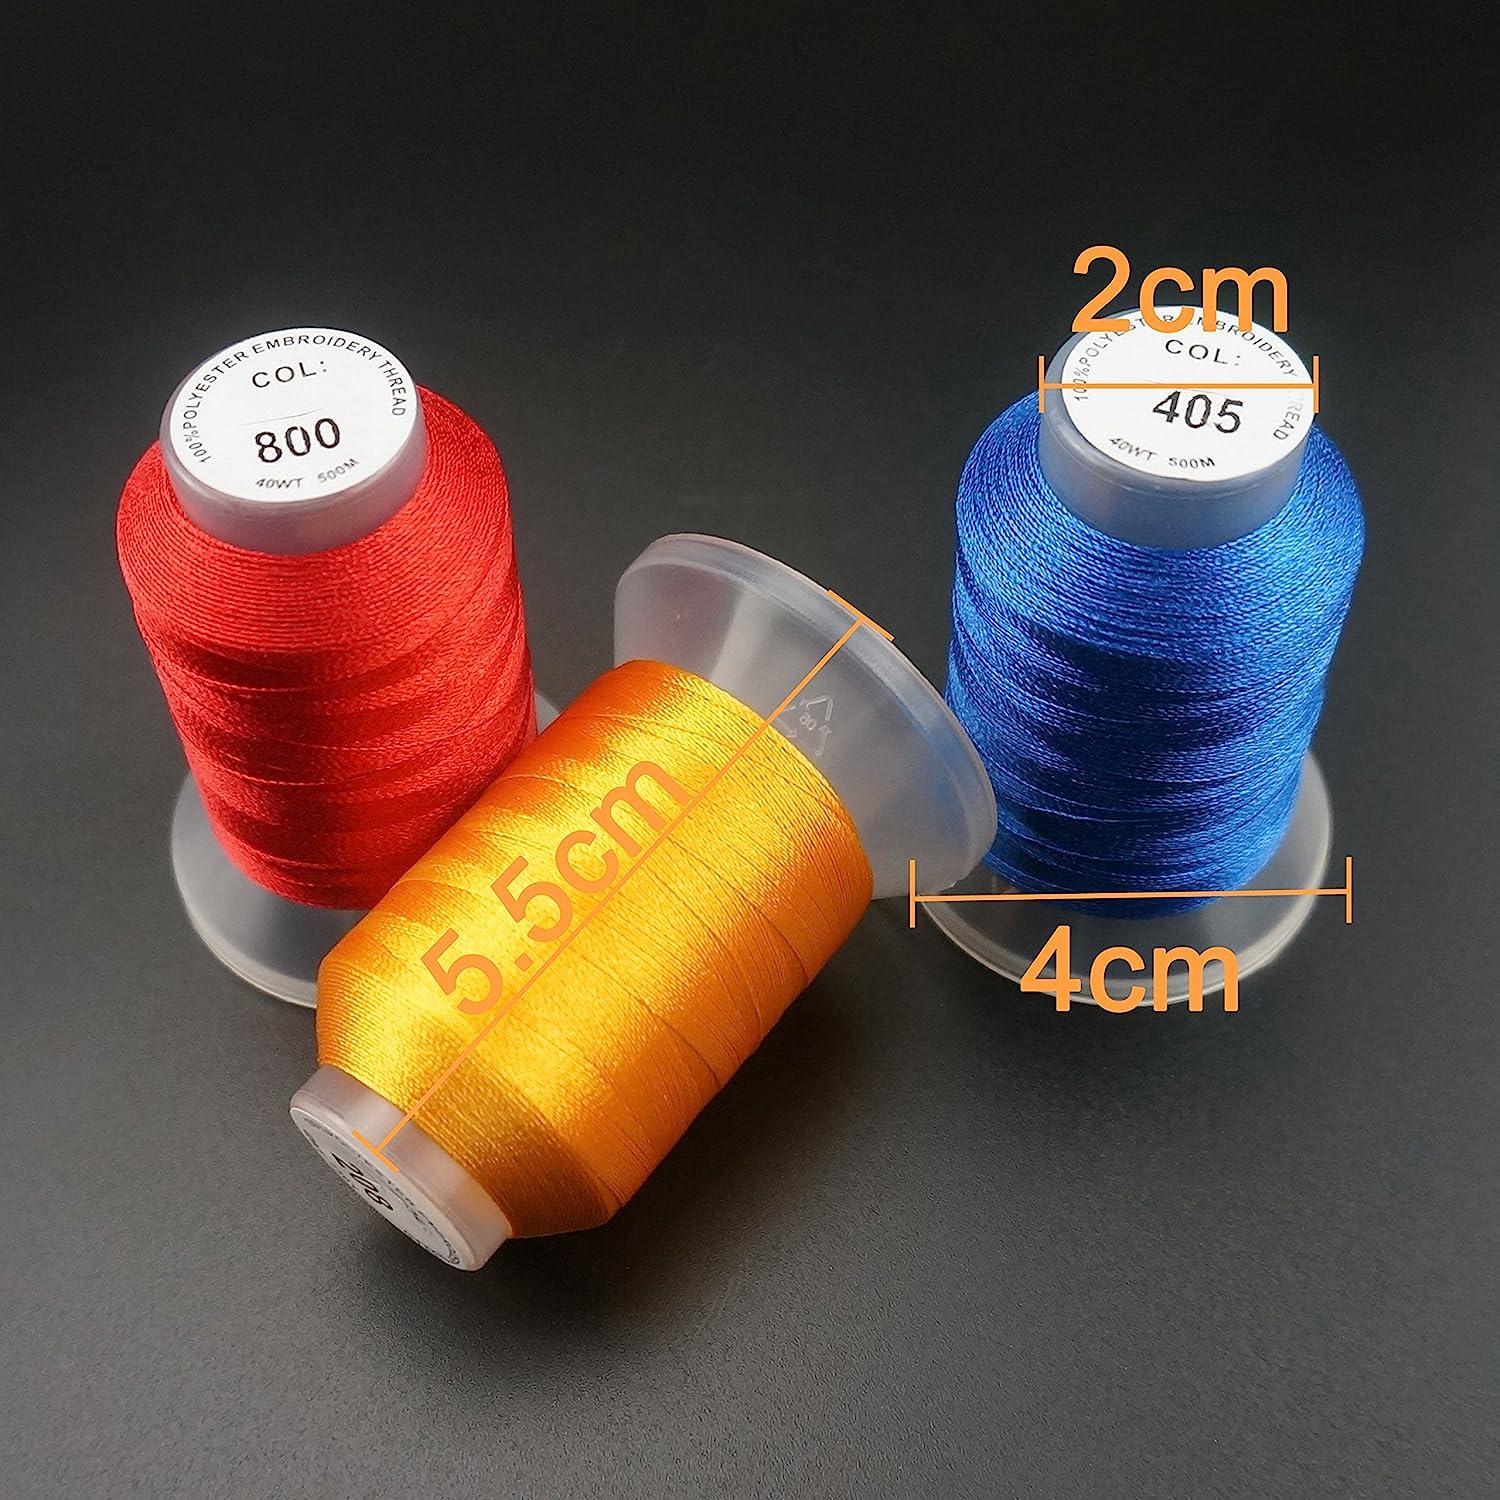 8 Colors Luminary Glow in The Dark Embroidery Machine Thread Kit